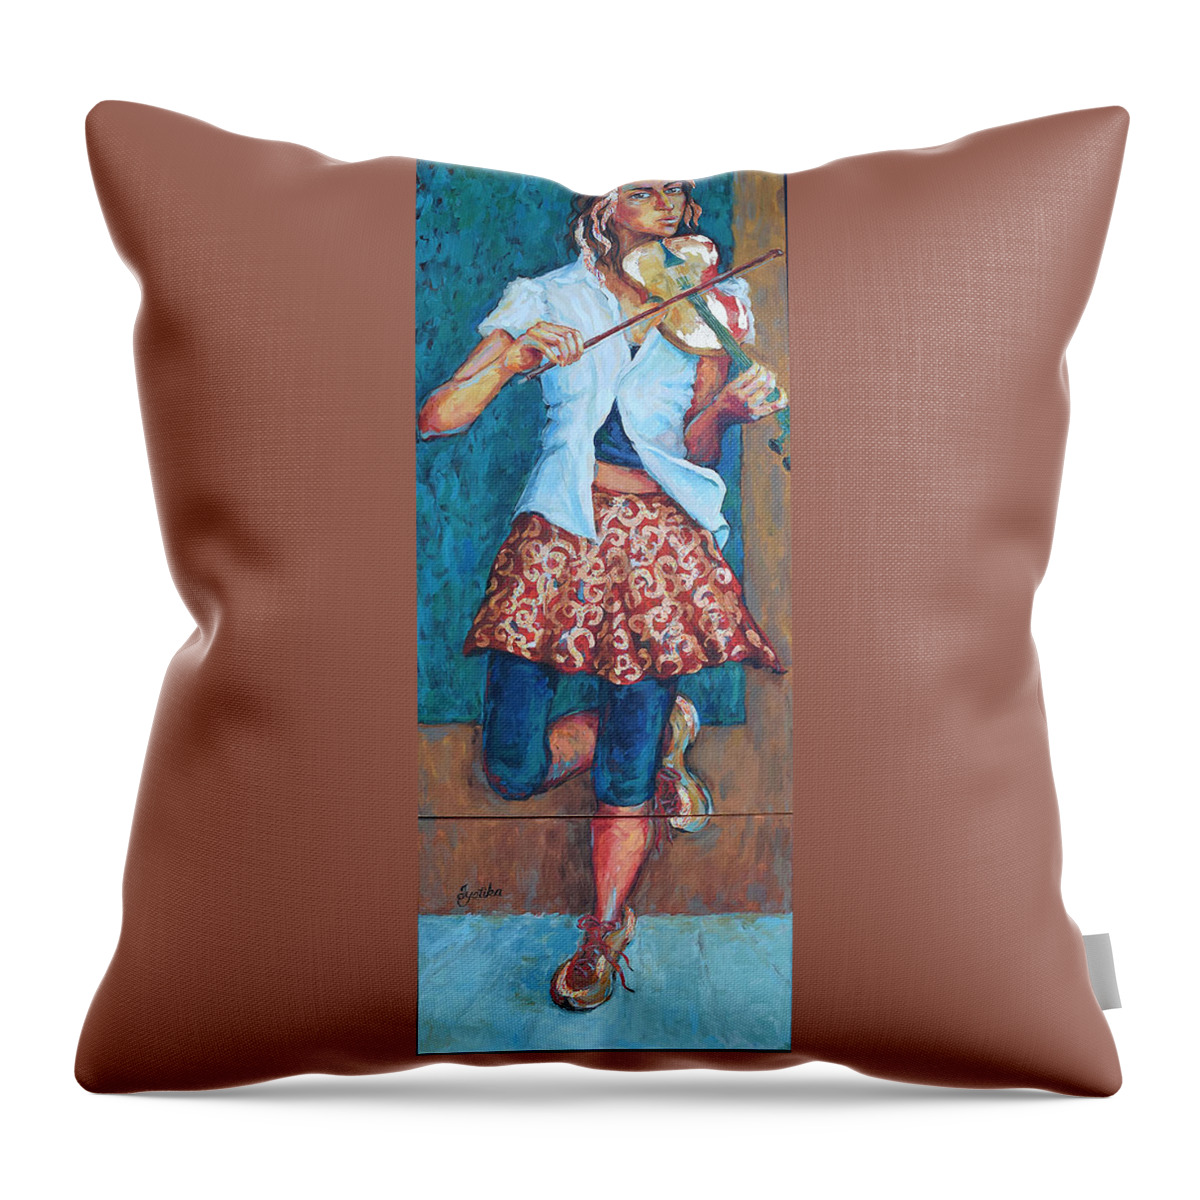 Original Painting Throw Pillow featuring the painting Street Violinist by Jyotika Shroff